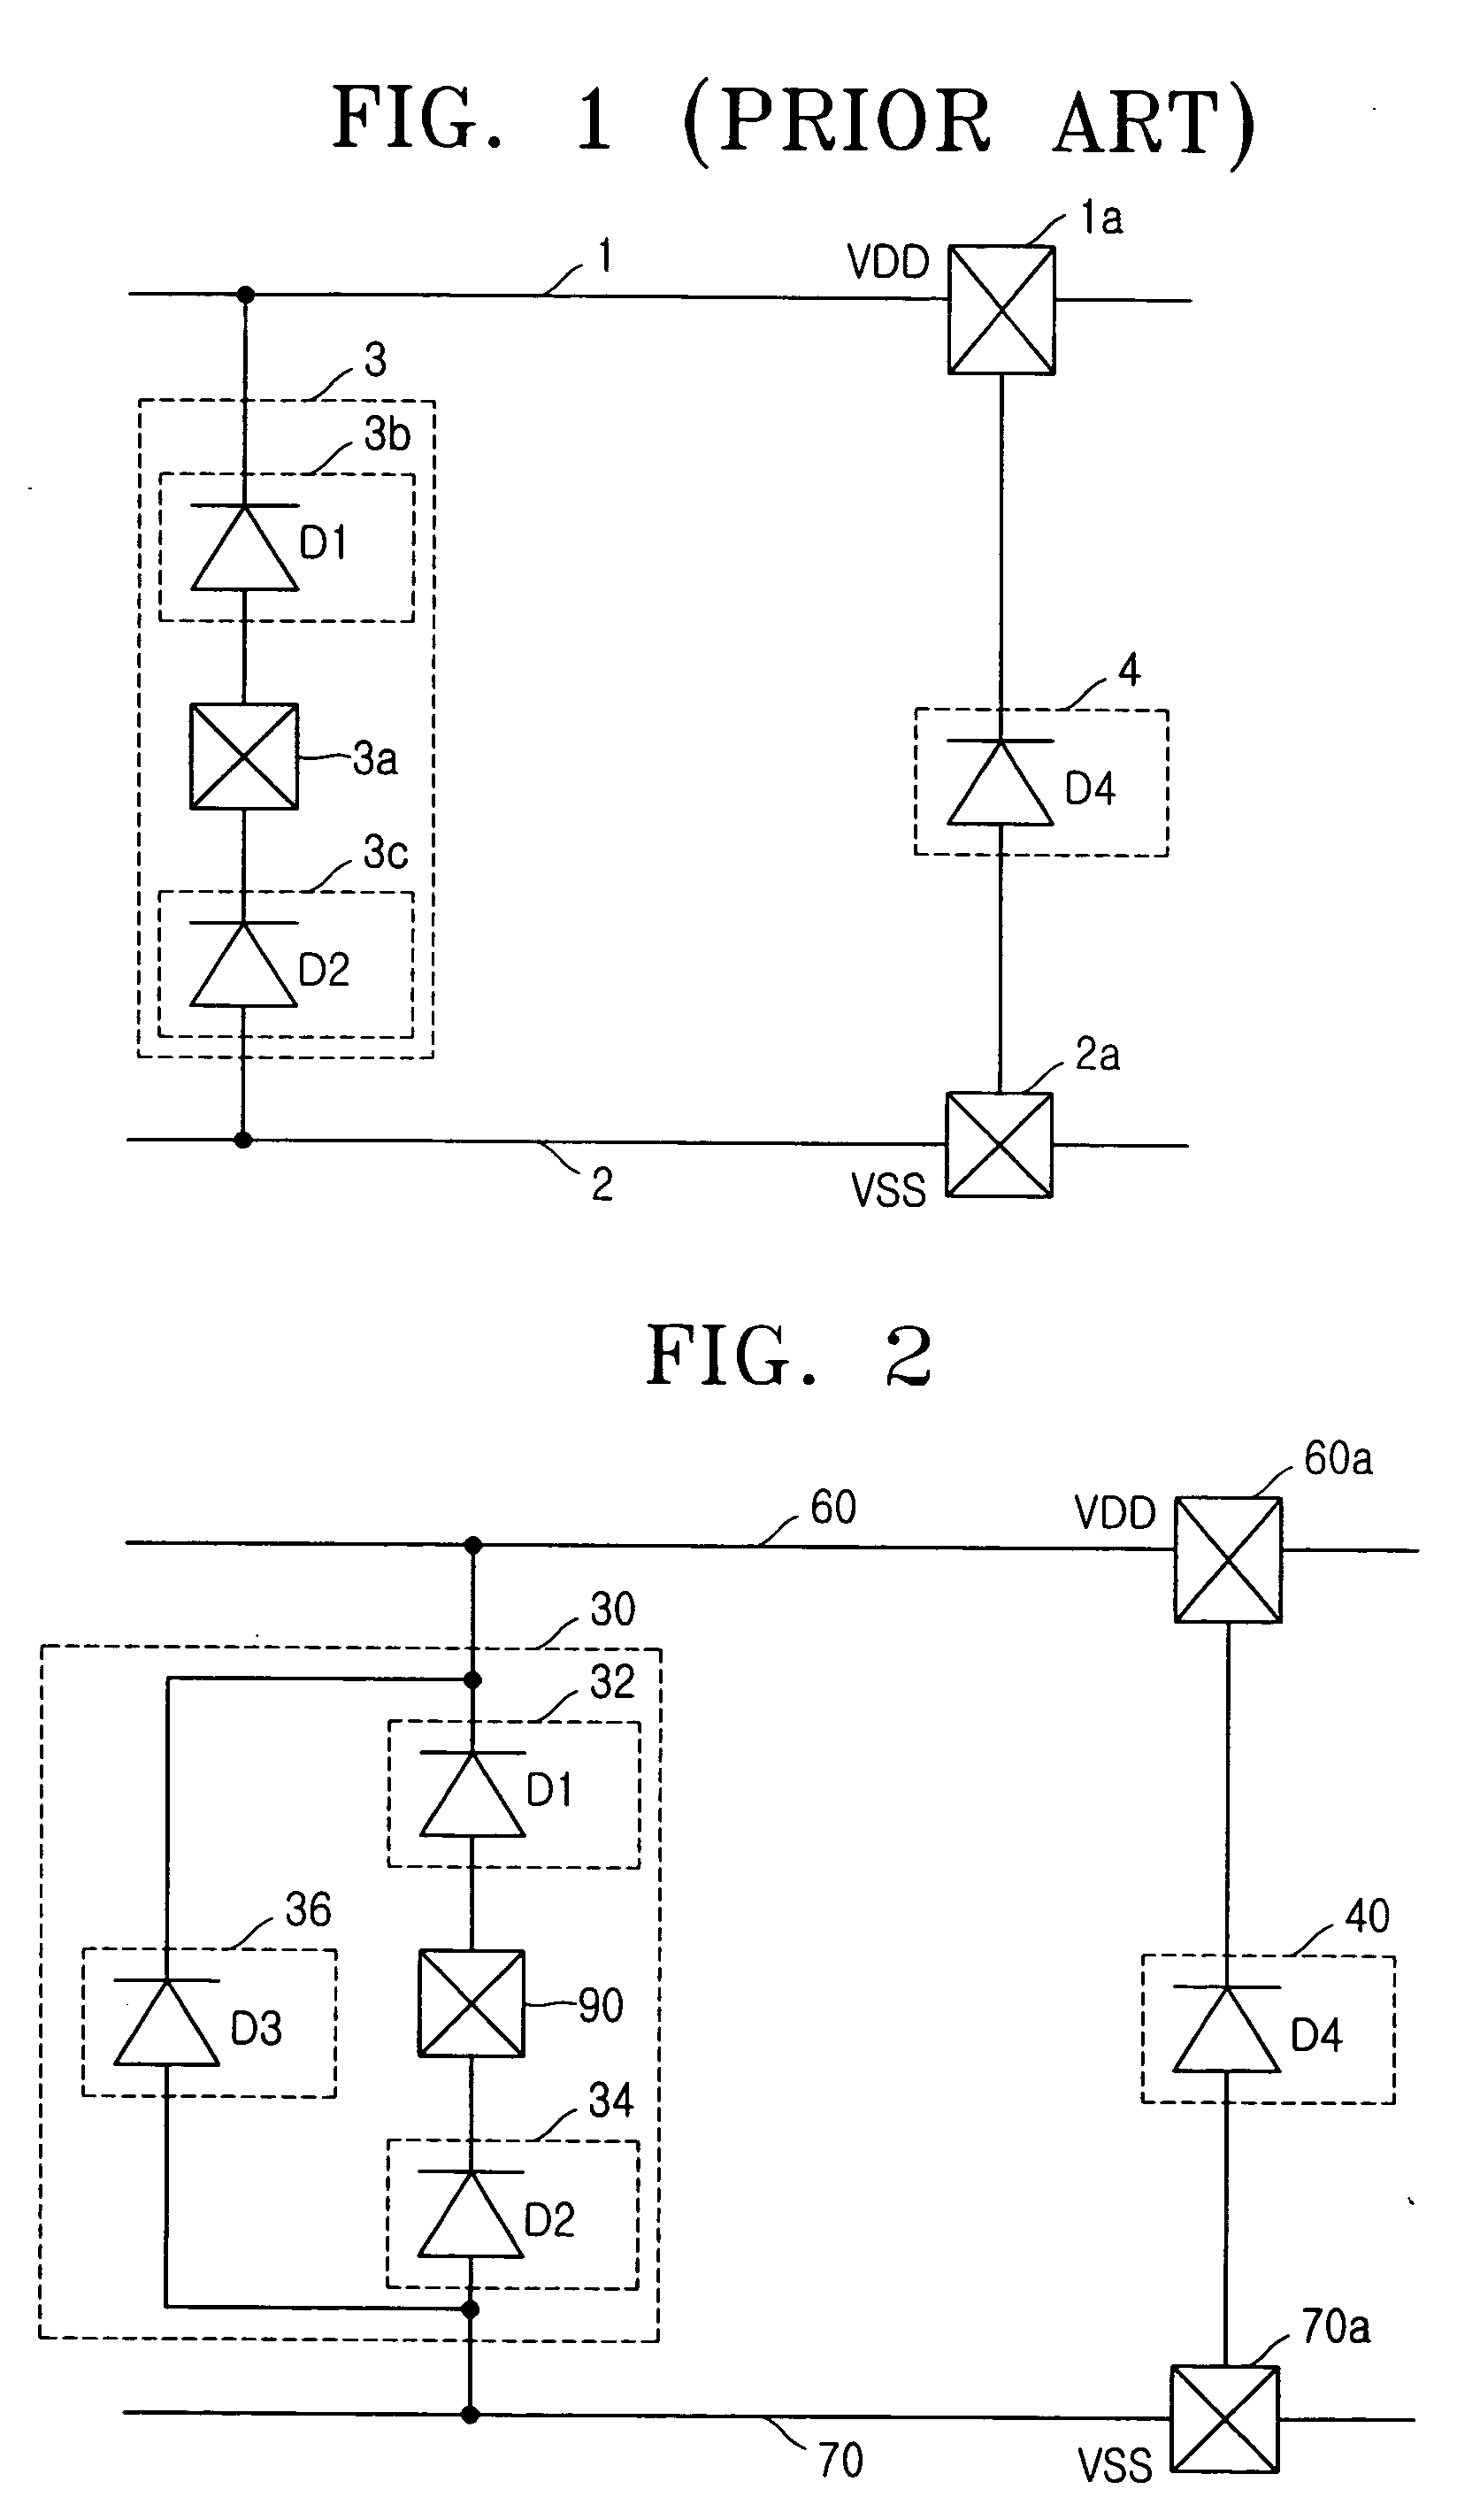 Integrated circuit device having input/output electrostatic discharge protection cell equipment with electrostatic discharge protection element and power clamp